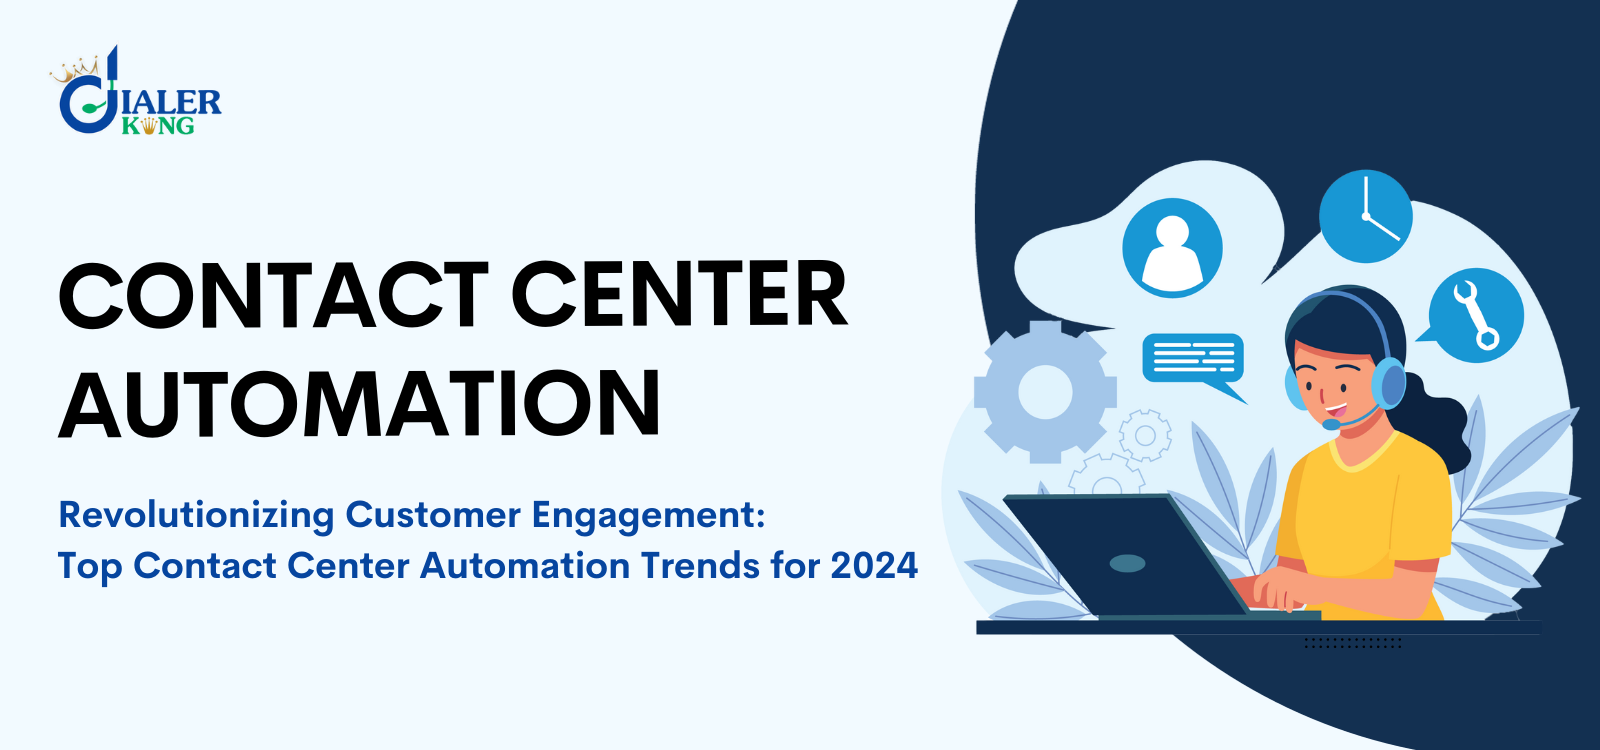 Contact center automation